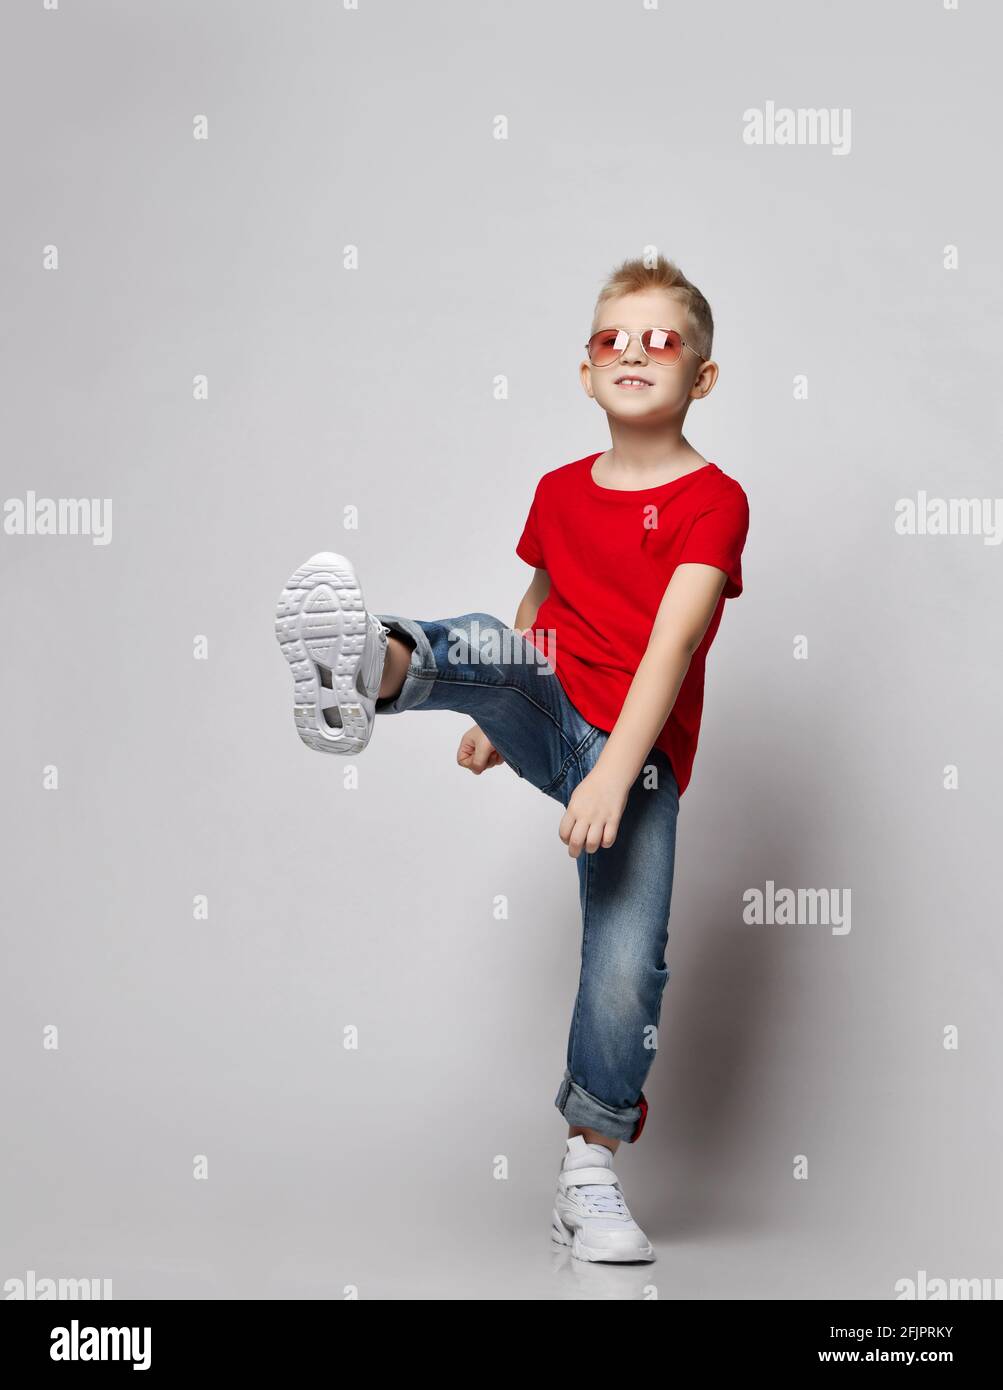 Frolic kid boy teenager in red t-shirt, blue jeans, white sneakers and sunglasses stands holding his foot up Stock Photo